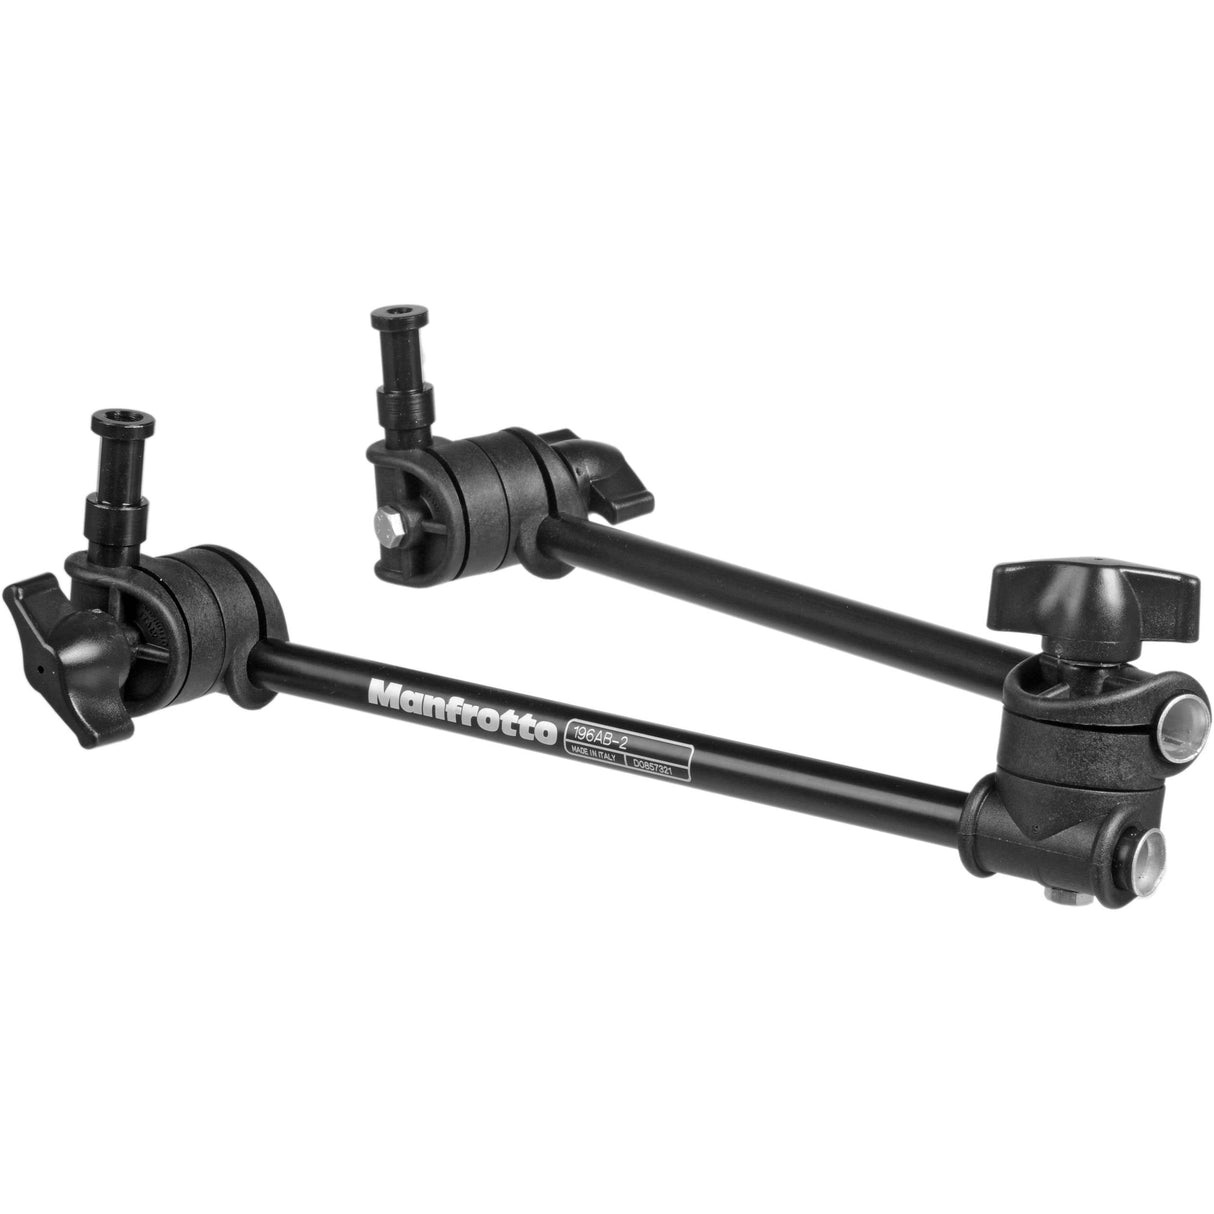 Manfrotto 196AB-2 Articulated Arm - 2 Sections, Without Camera Bracket